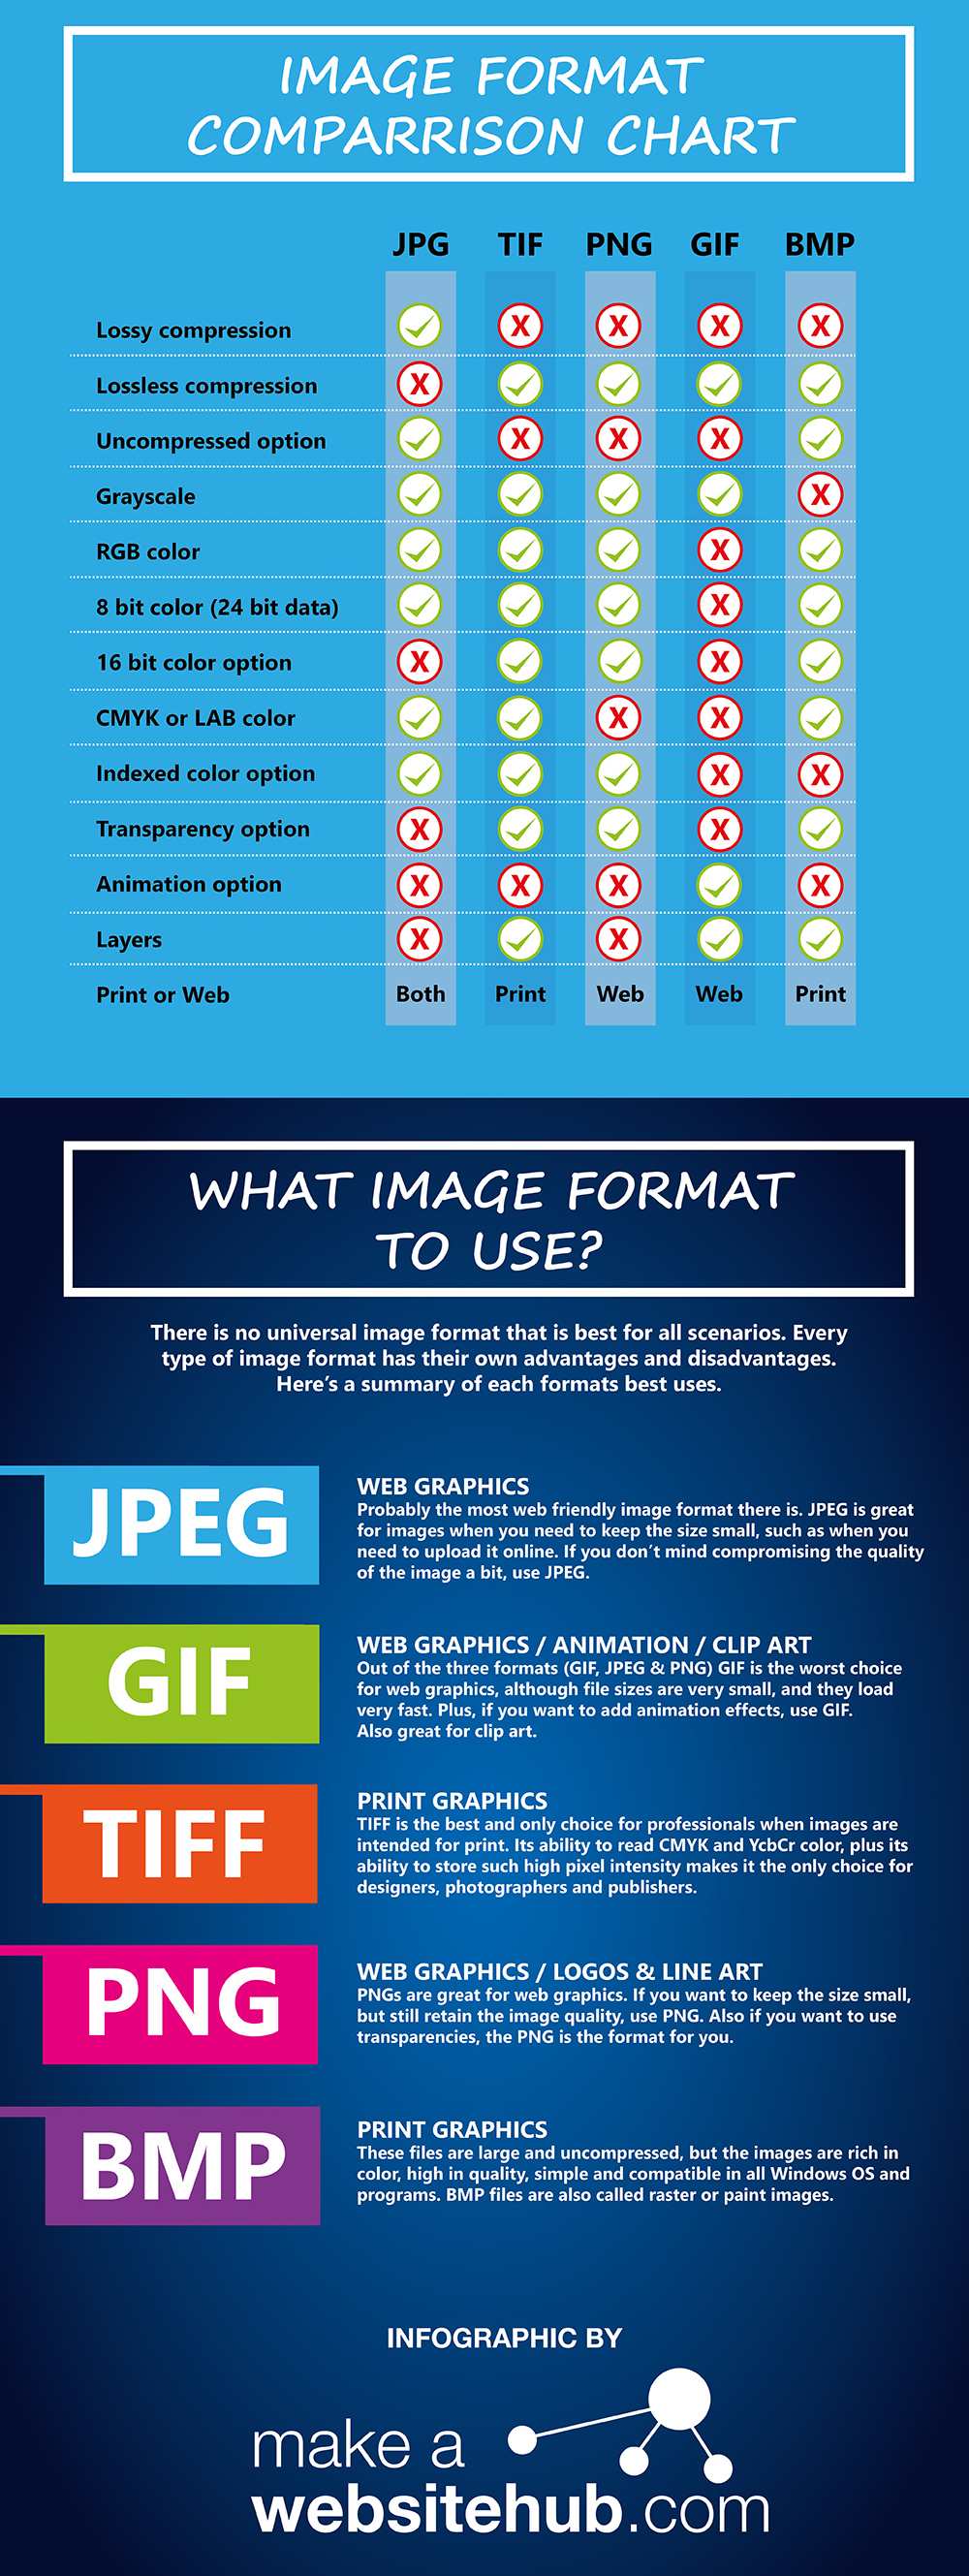 What’s The Difference Between JPEG, PNG and GIF Image Formats?